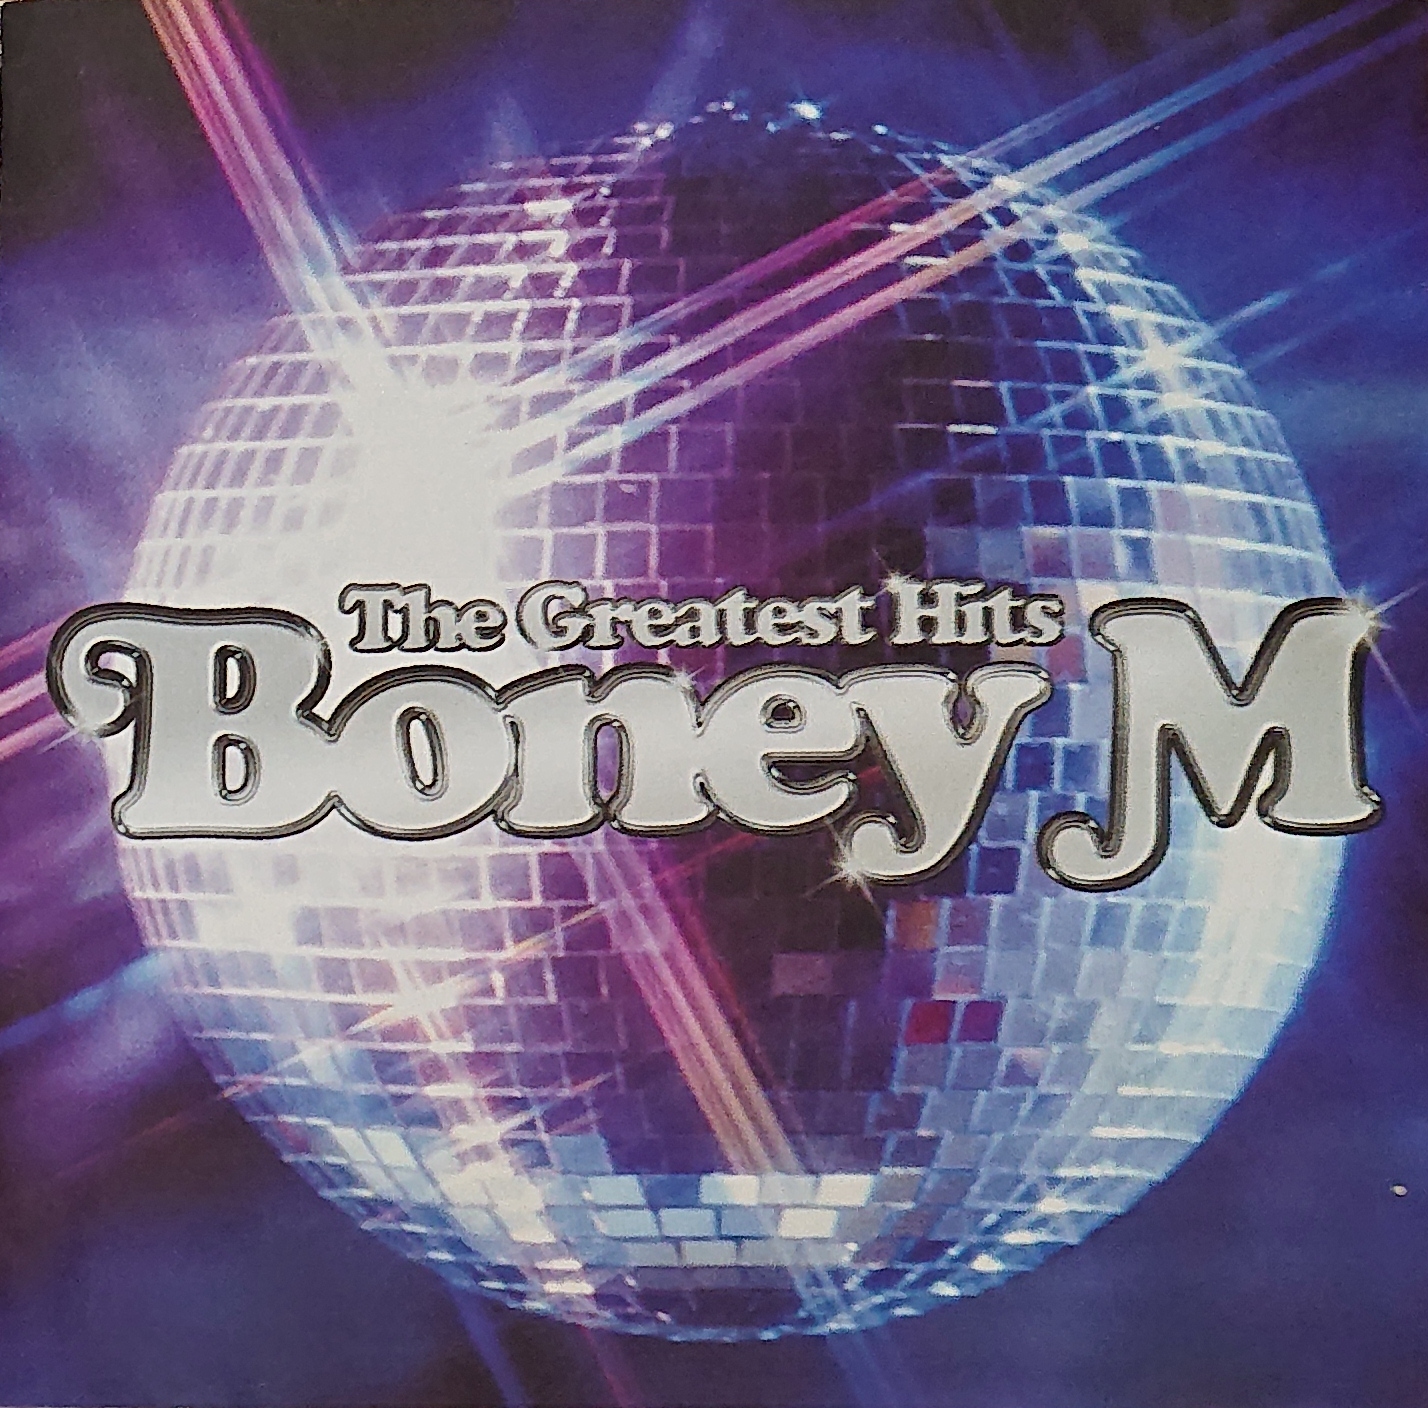 Picture of 74321 896142 The greatish hits by artist Boney M